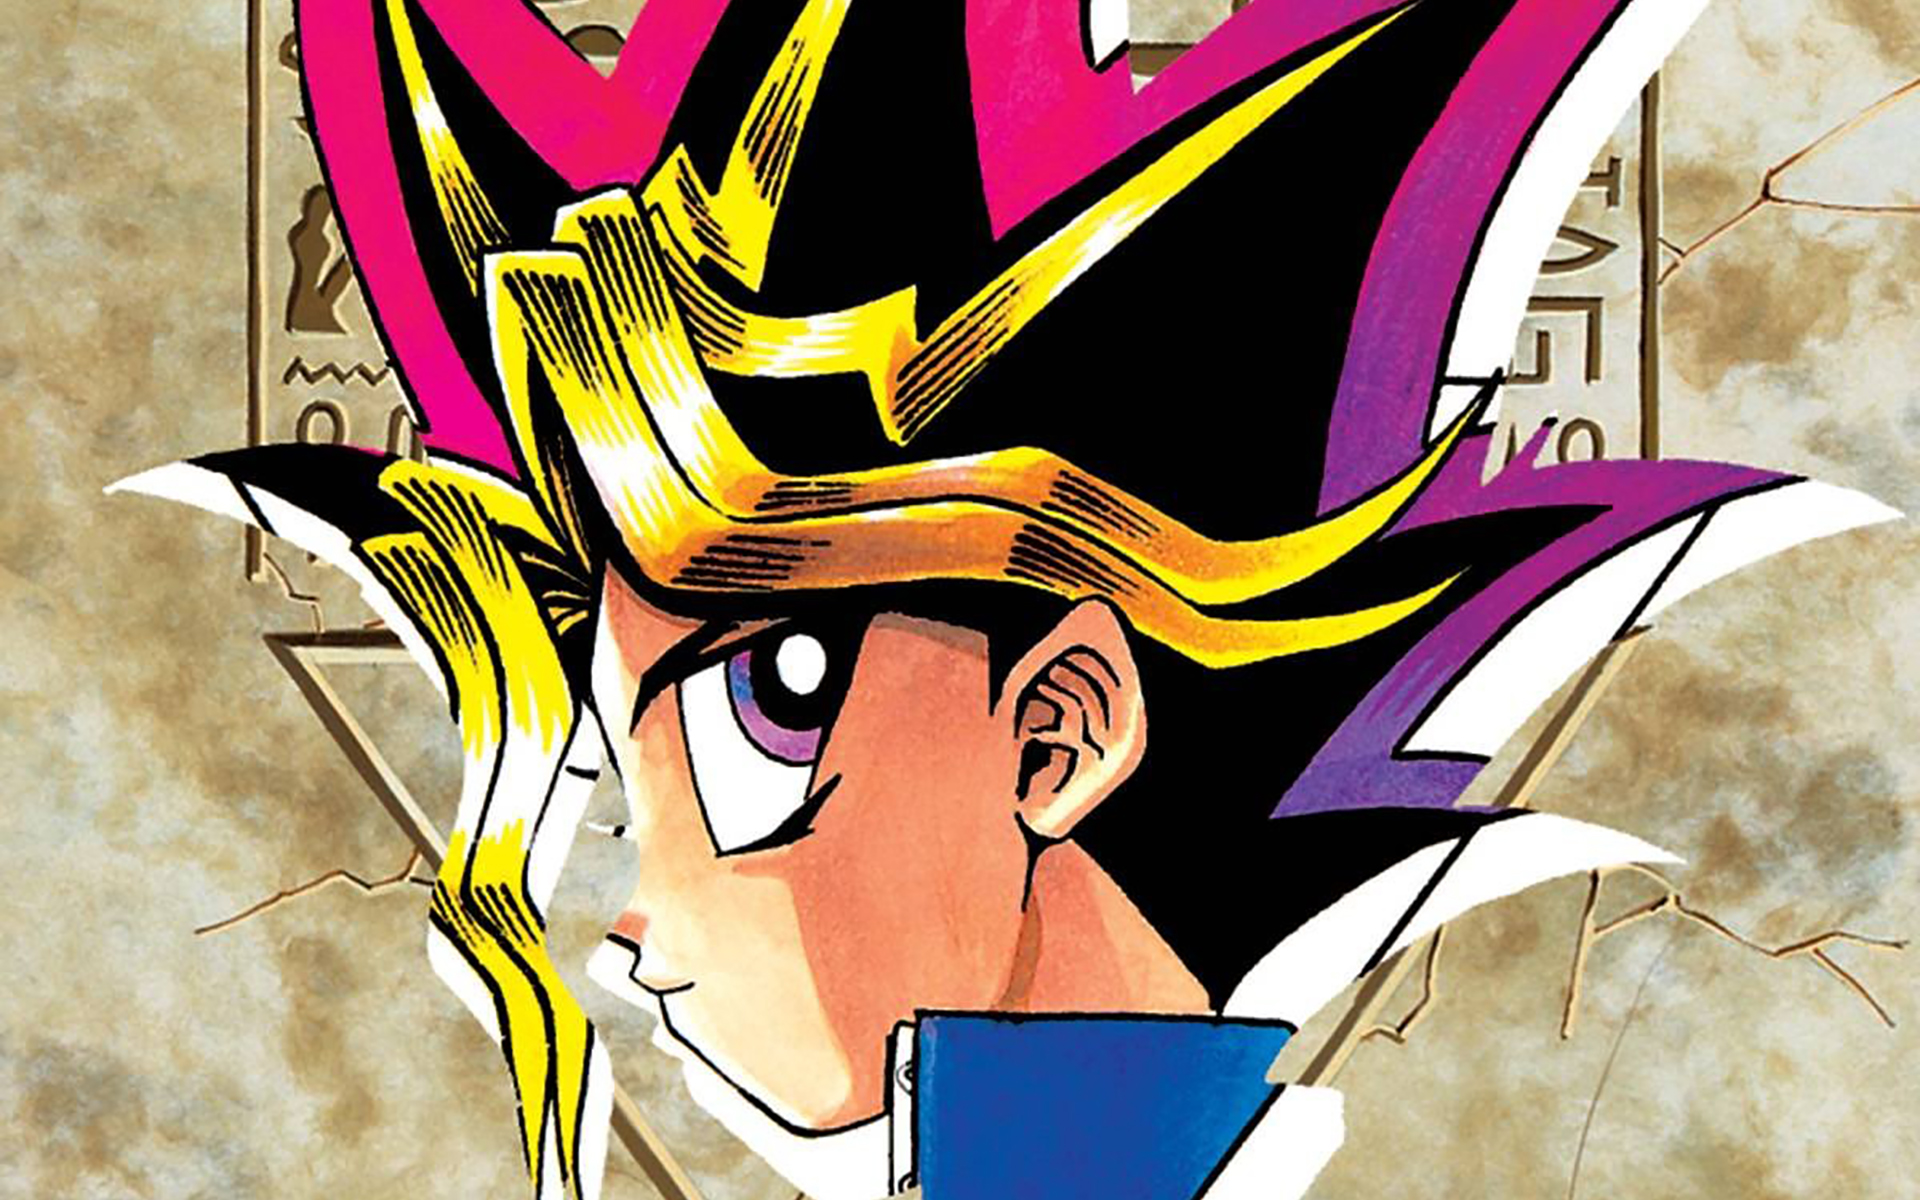 Artwork of Yugi Muto from the cover of a Yu-Gi-Oh! manga collection 